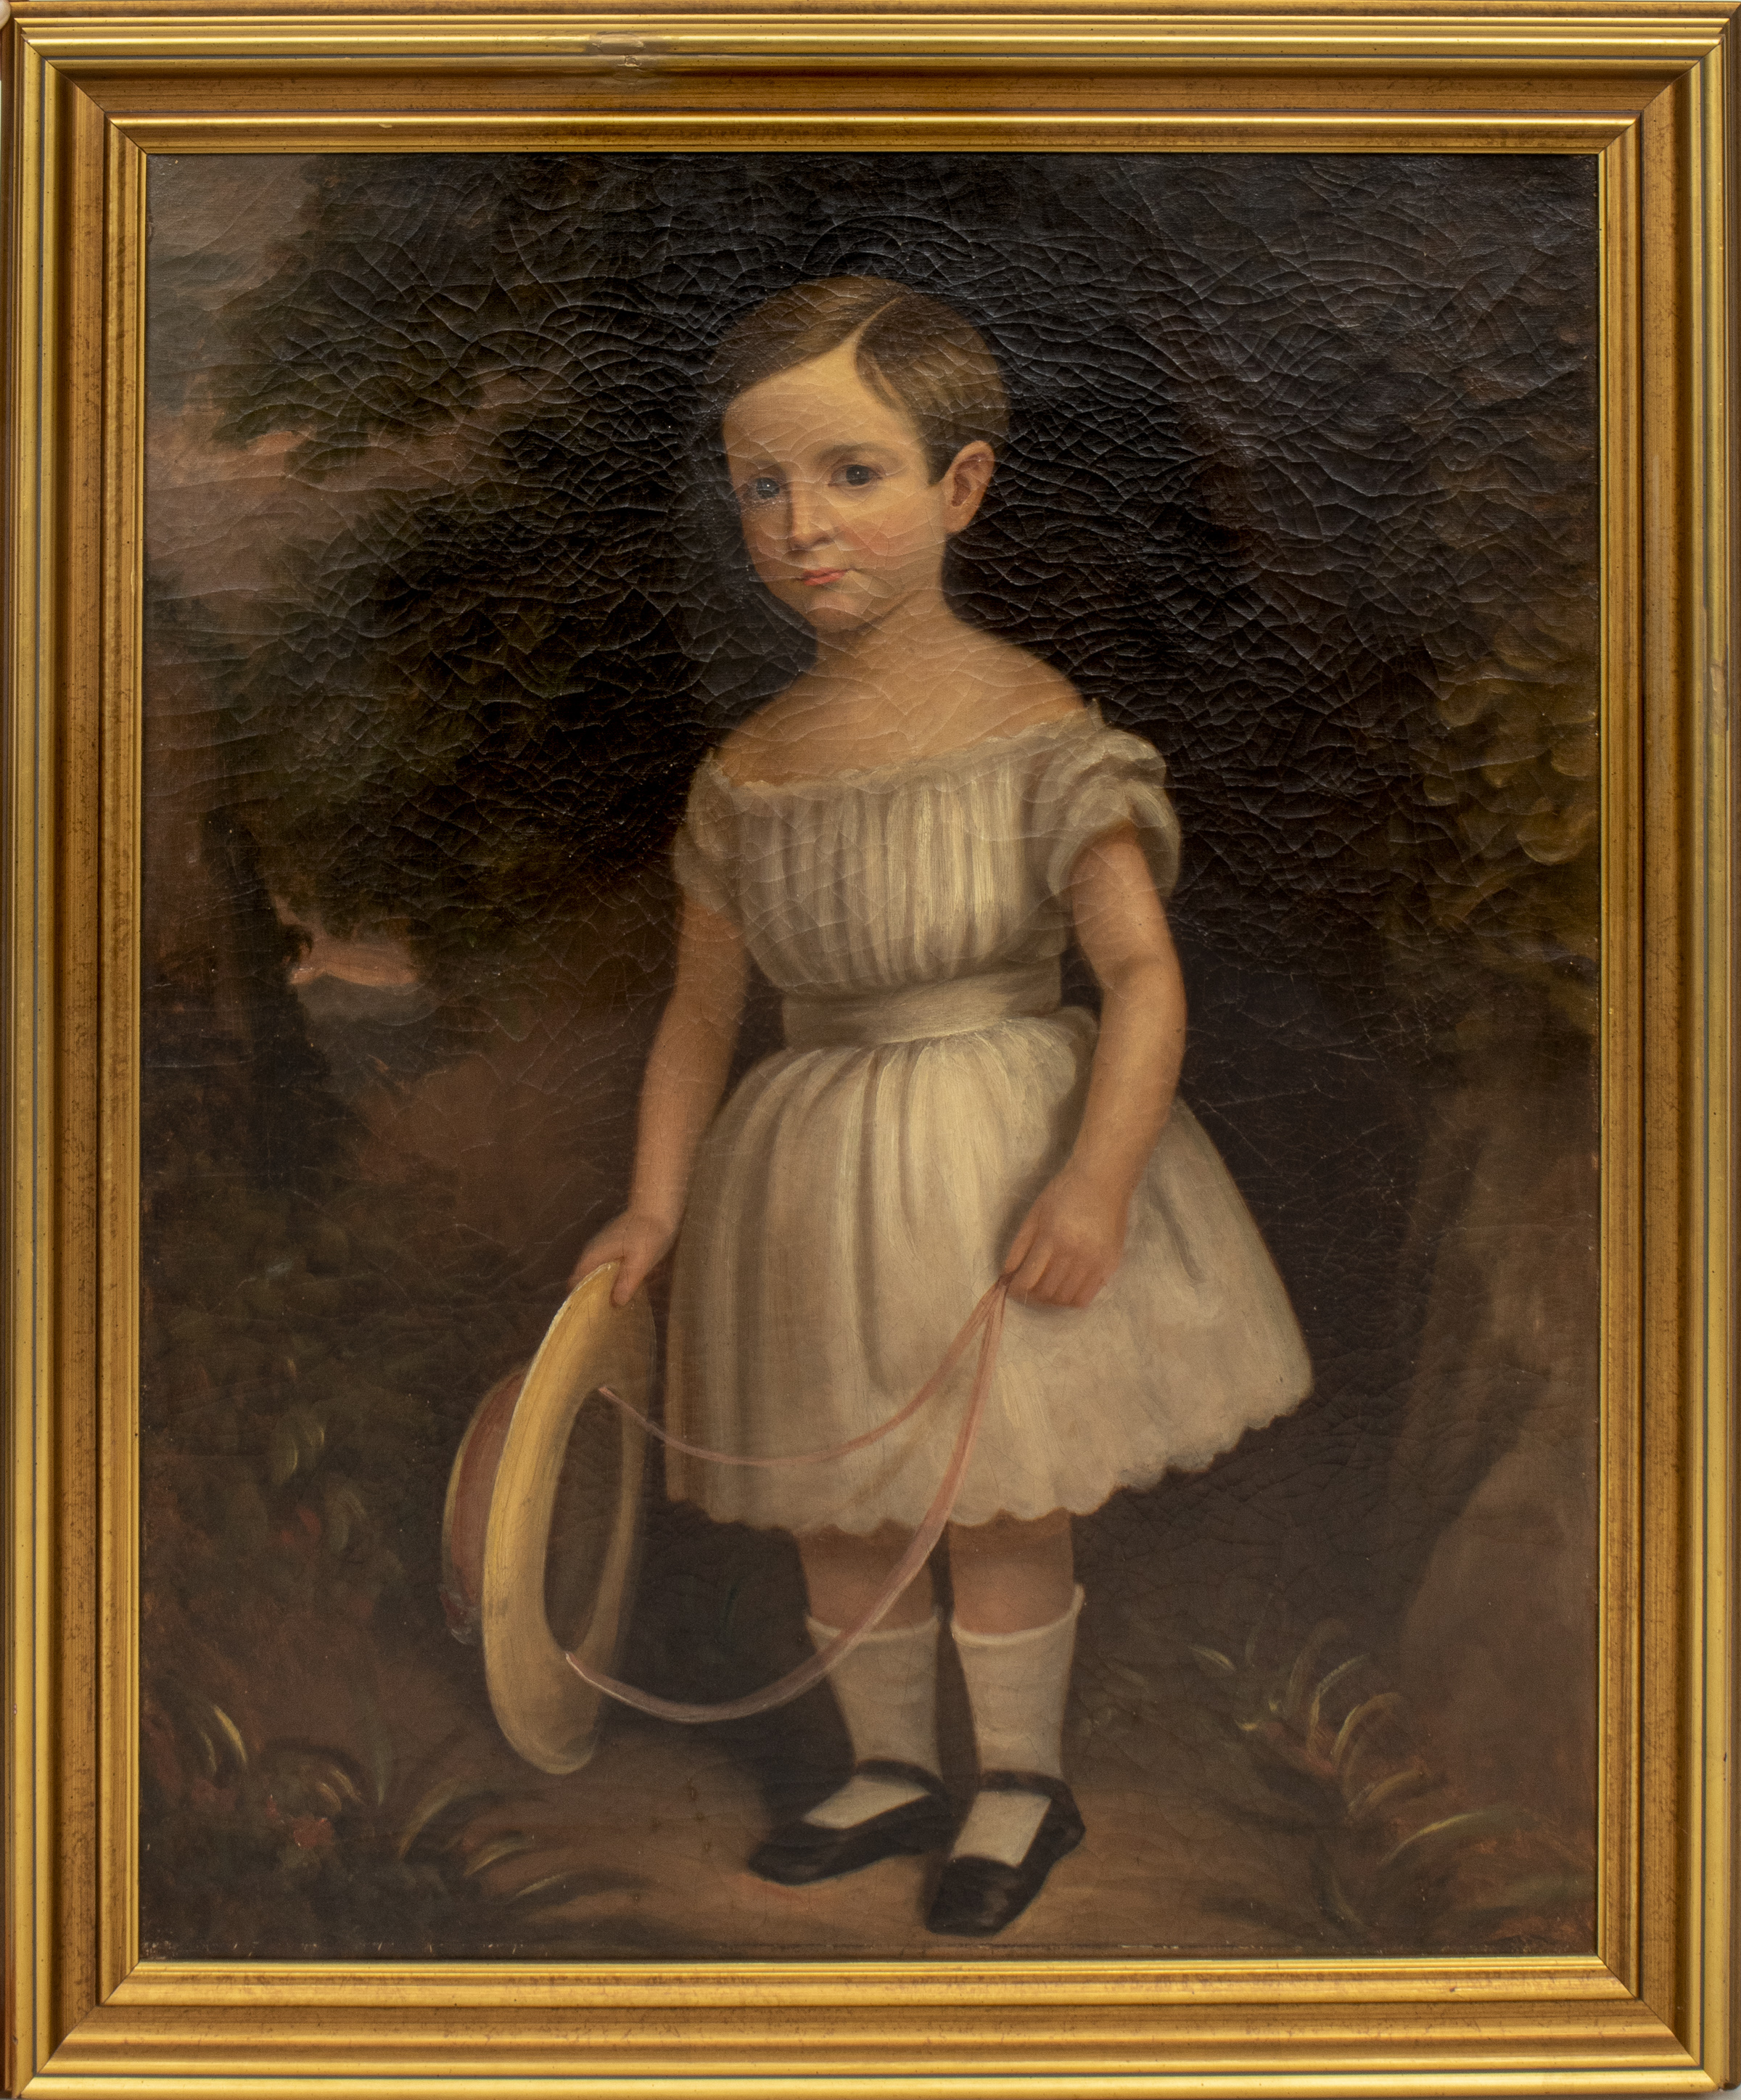 ANTIQUE PORTRAIT OF A GIRL WITH